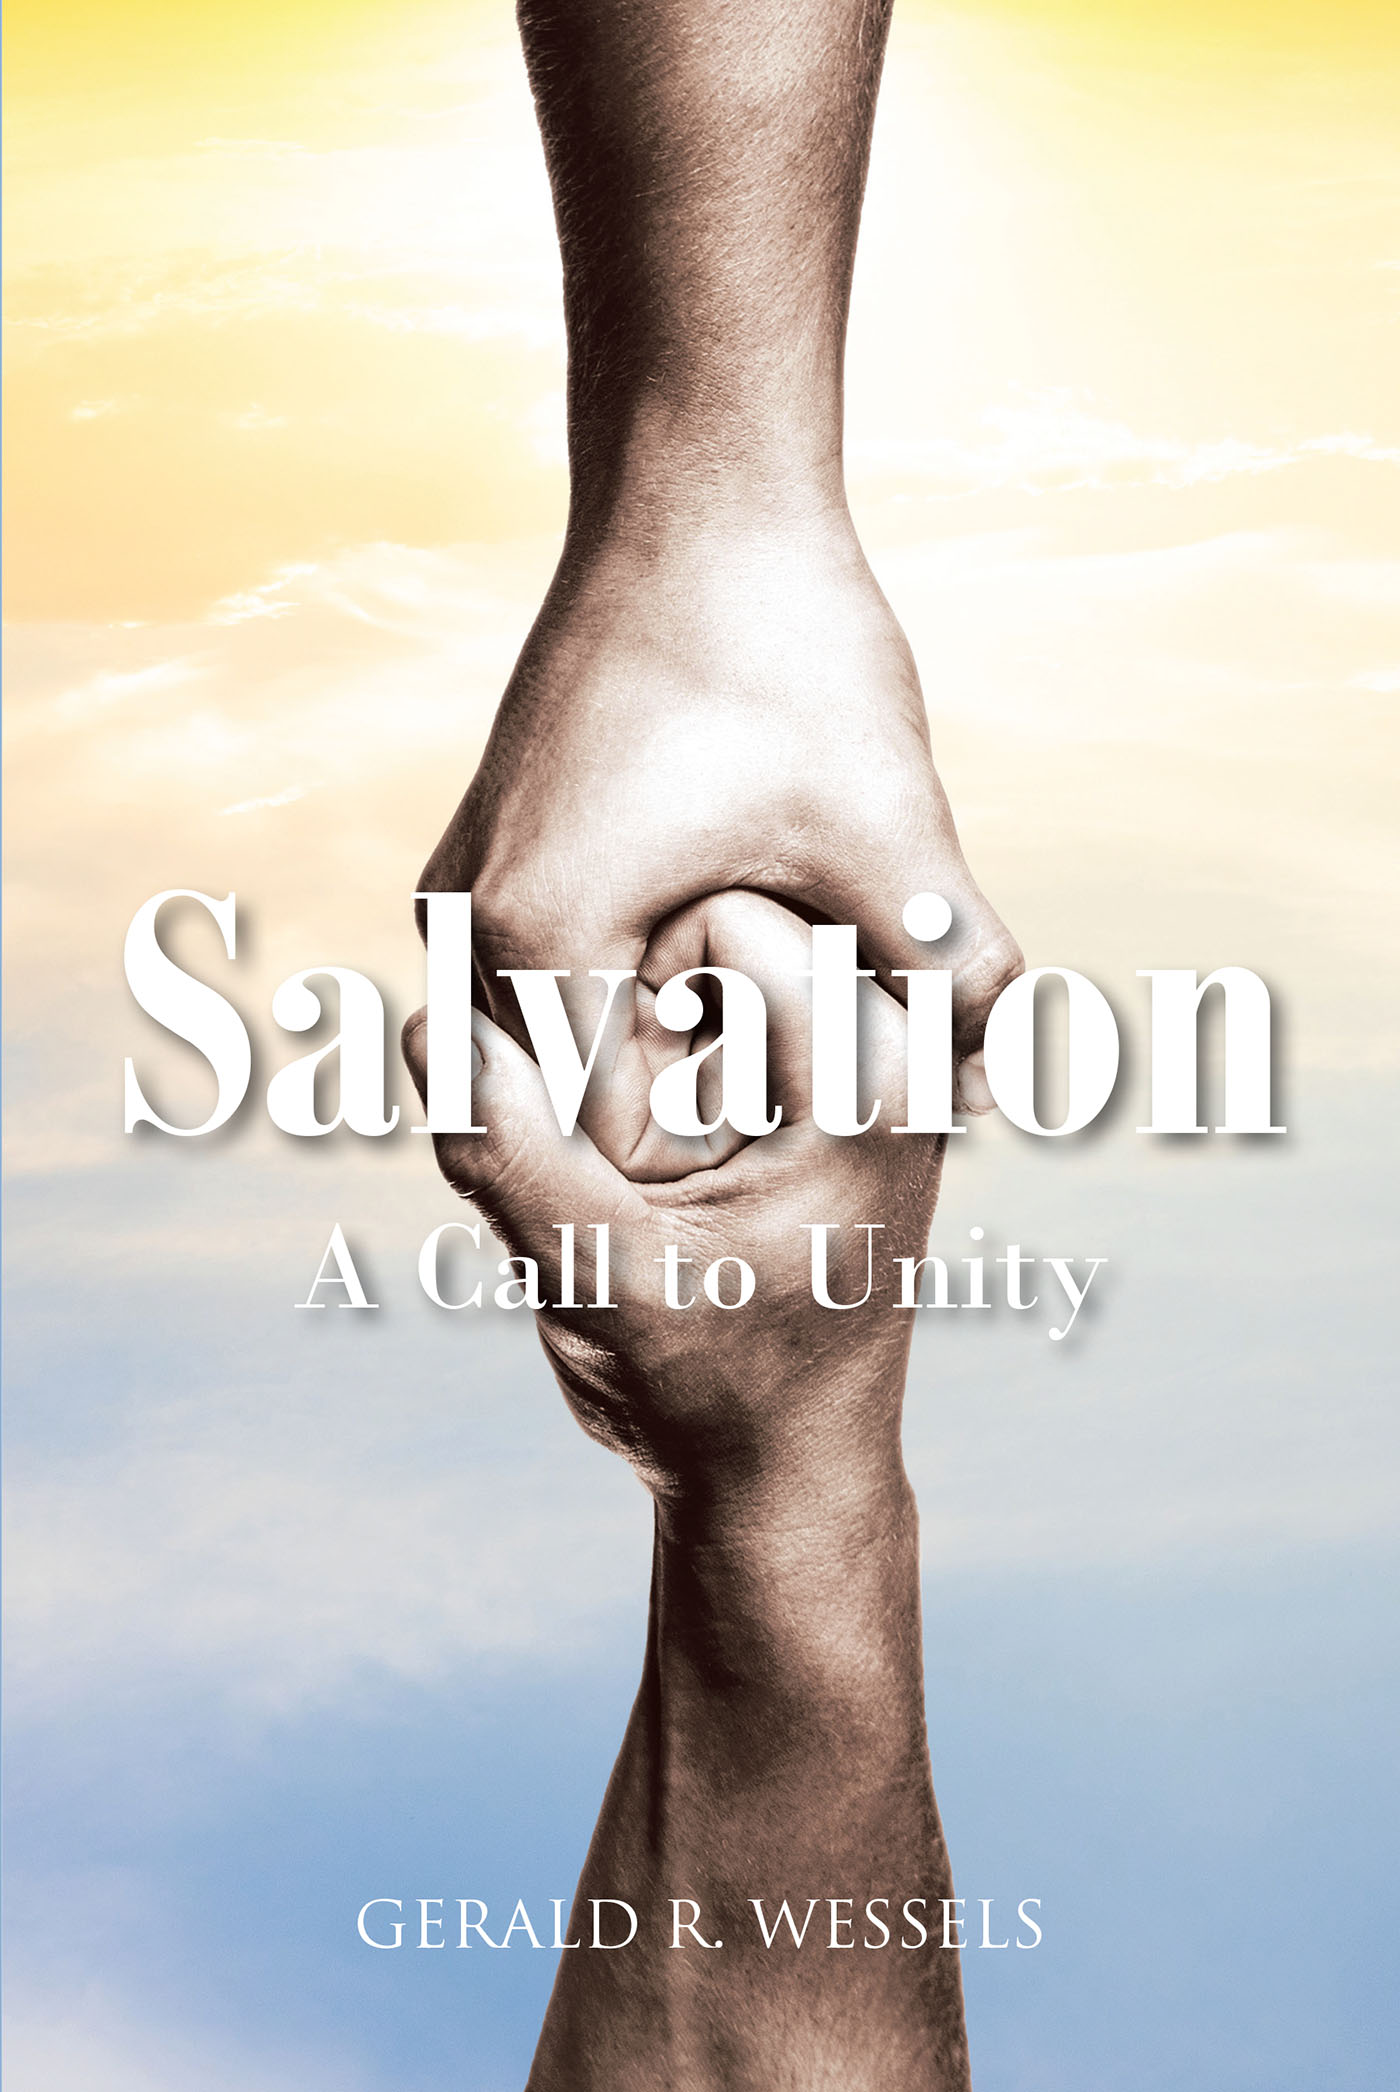 Gerald R. Wessels’s Newly Released "Salvation A Call to Unity" is an Empowering Message of the Need for Connection Within the Christian Community